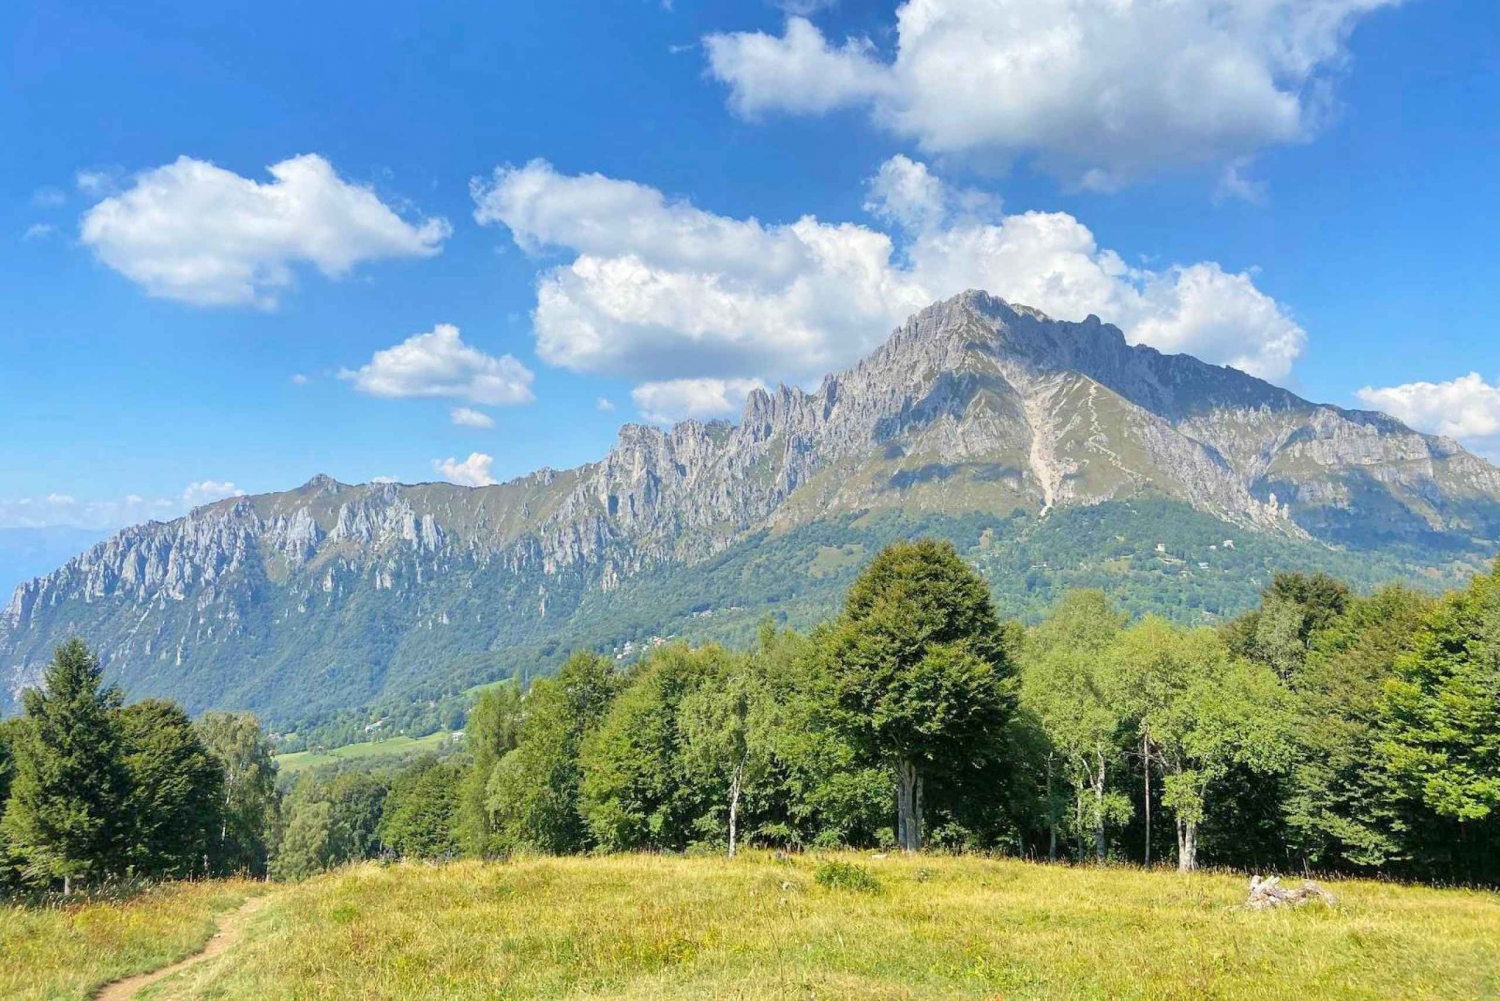 Lake Como: half-day hike in dolomitic mountains over Lecco